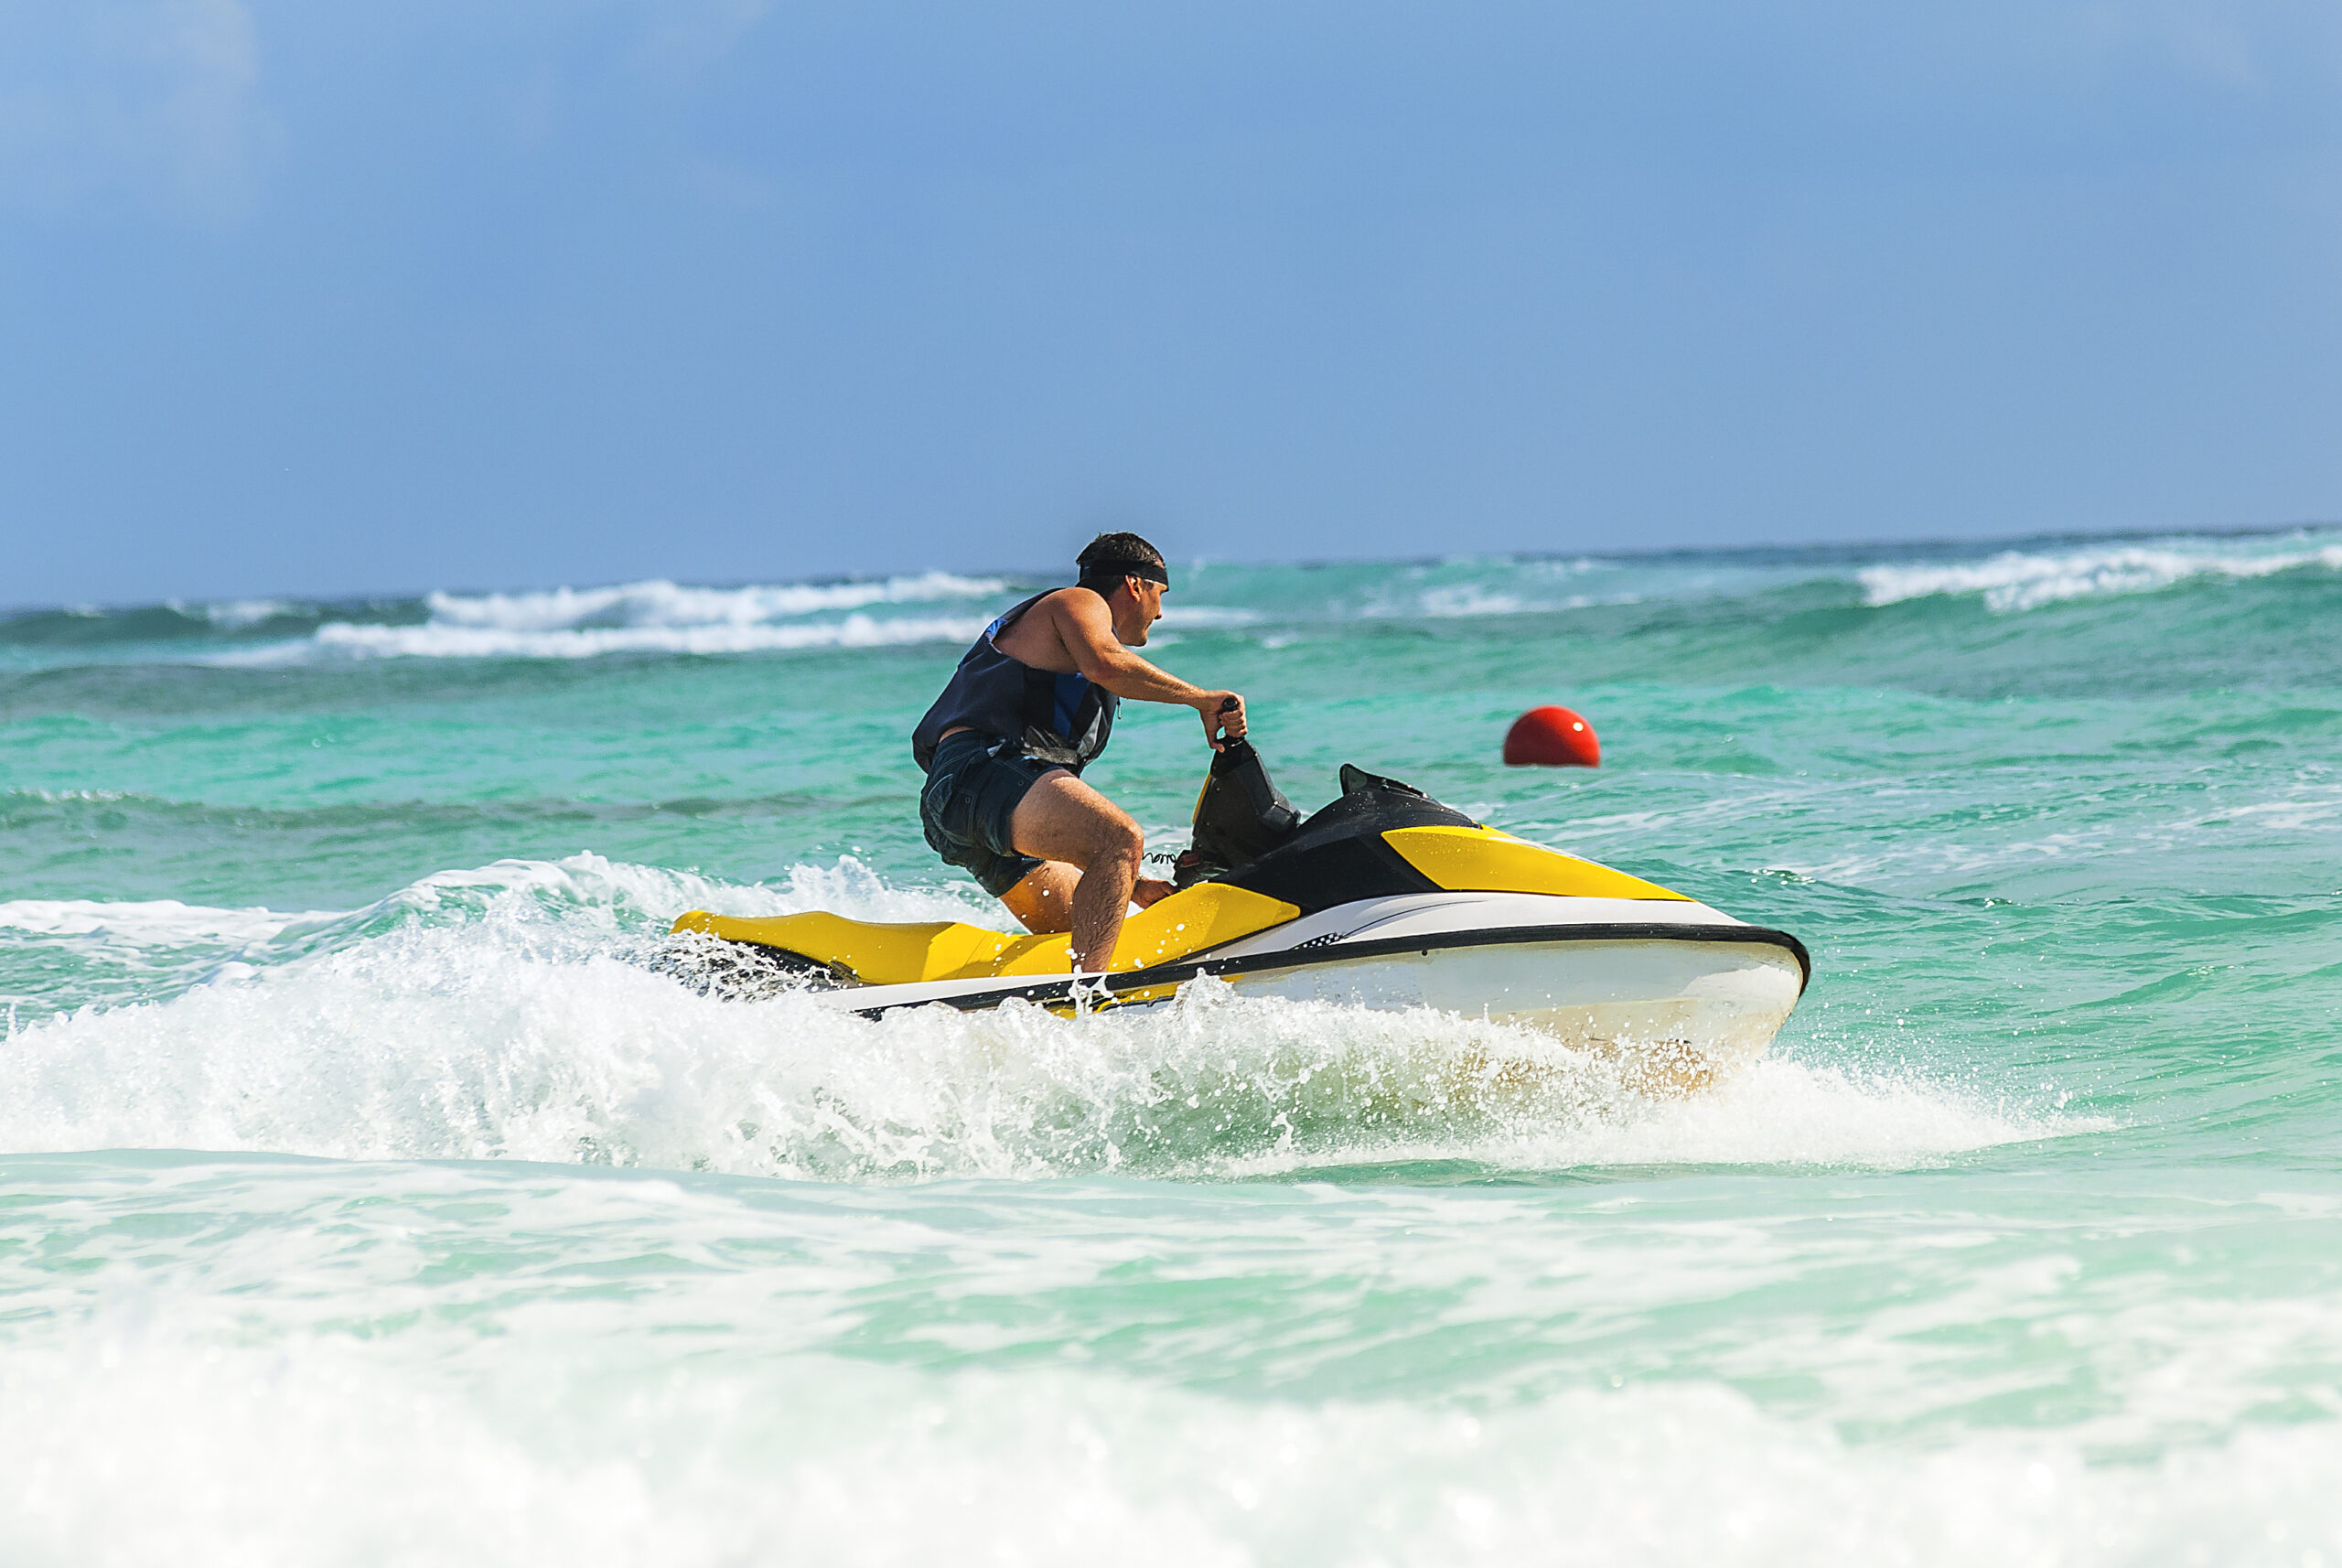 a-man-driving-a-yellow-jet-ski-on-a-clear-ocean